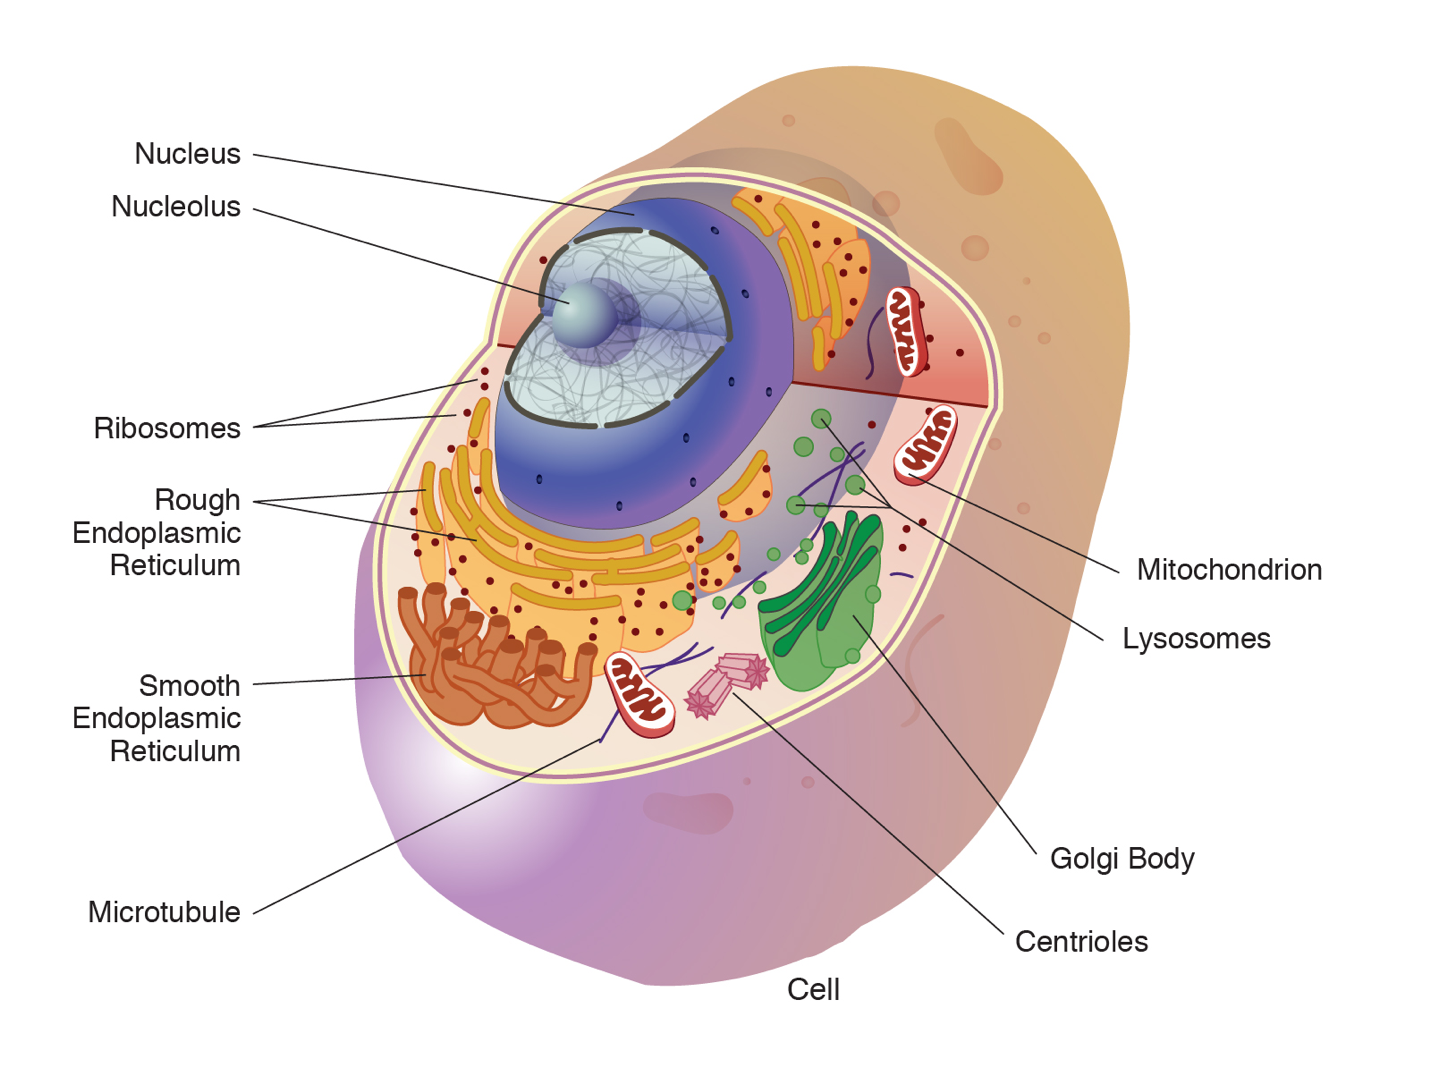 Animal cell with various organelles labeled.